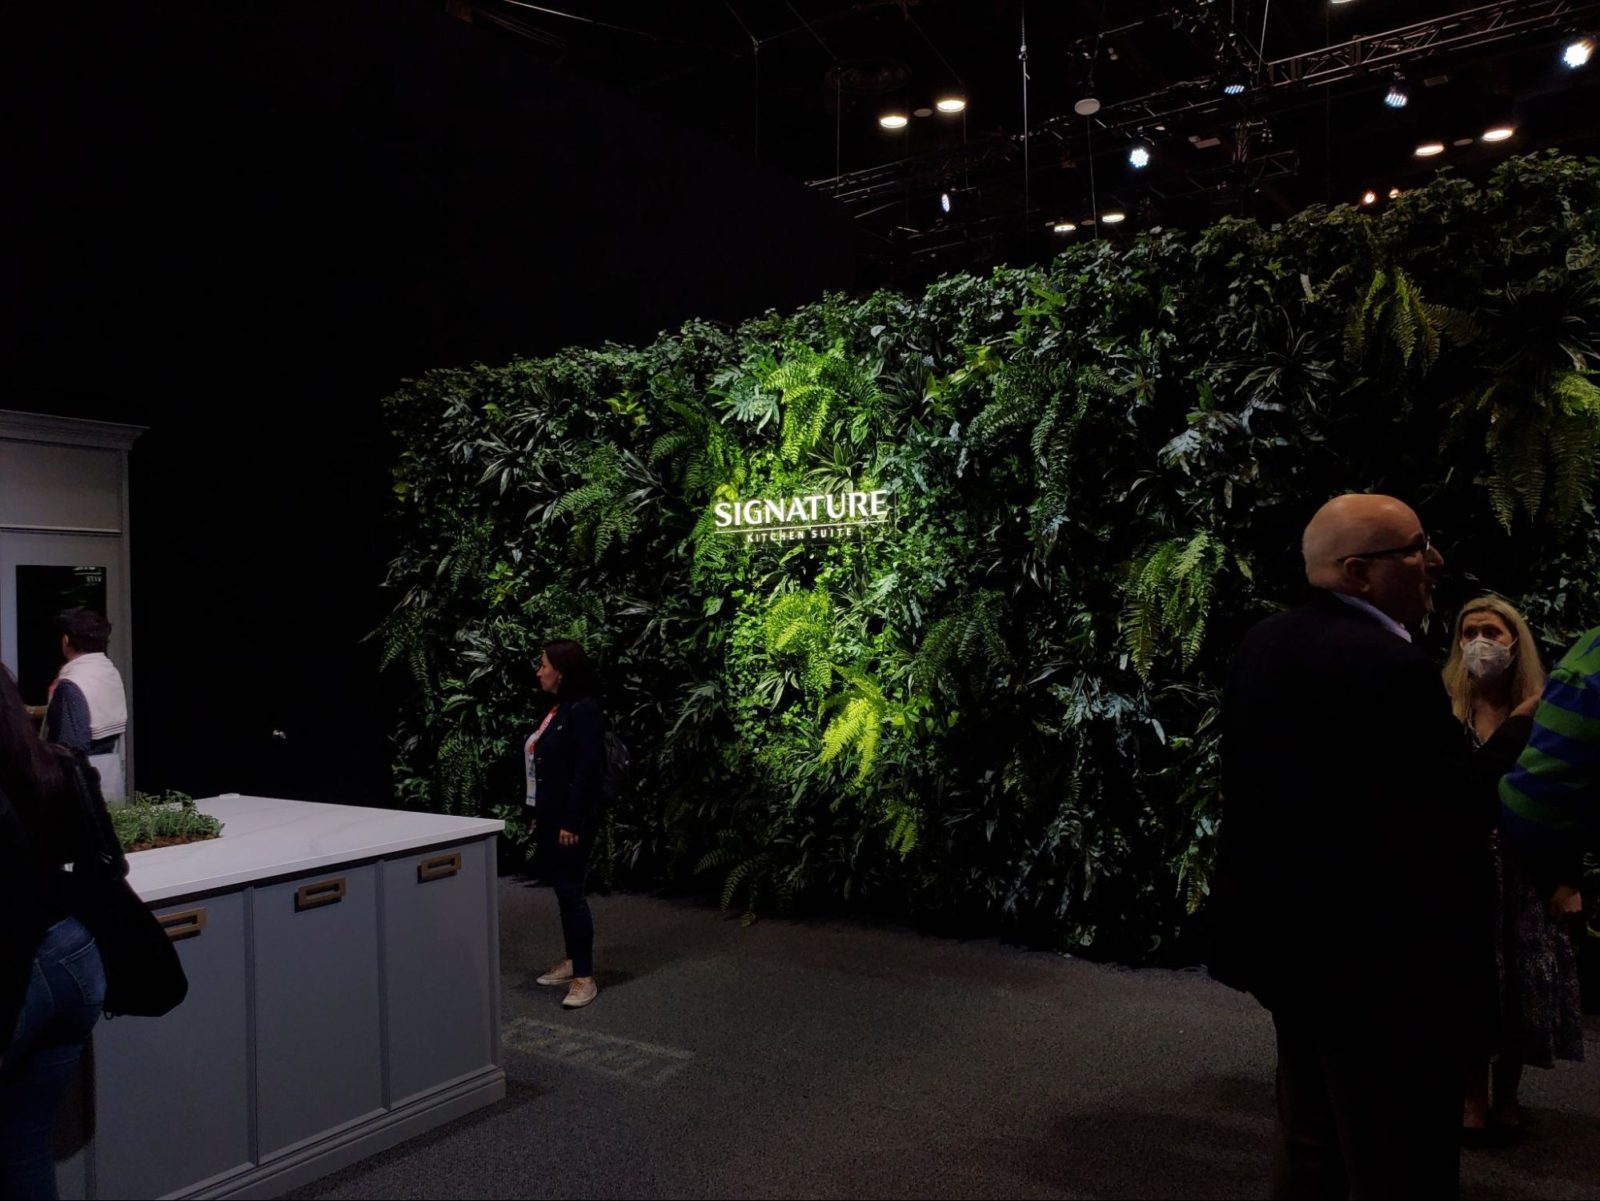 Signature's live greenery wall at KBIS 2022 was stunning.